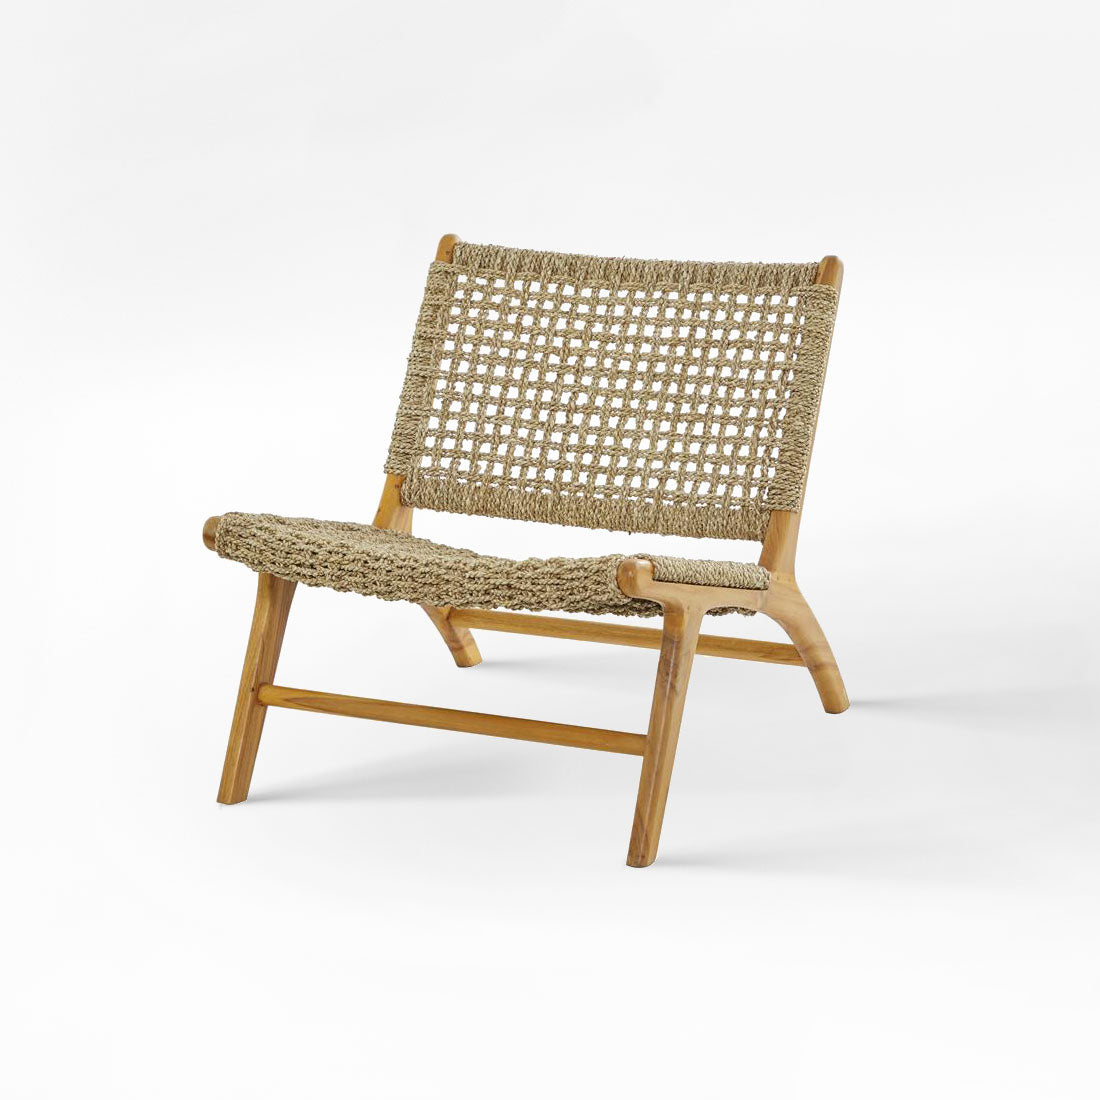 Light Brown Teak Wood Handmade Accent Chair With Woven Seagrass Seat